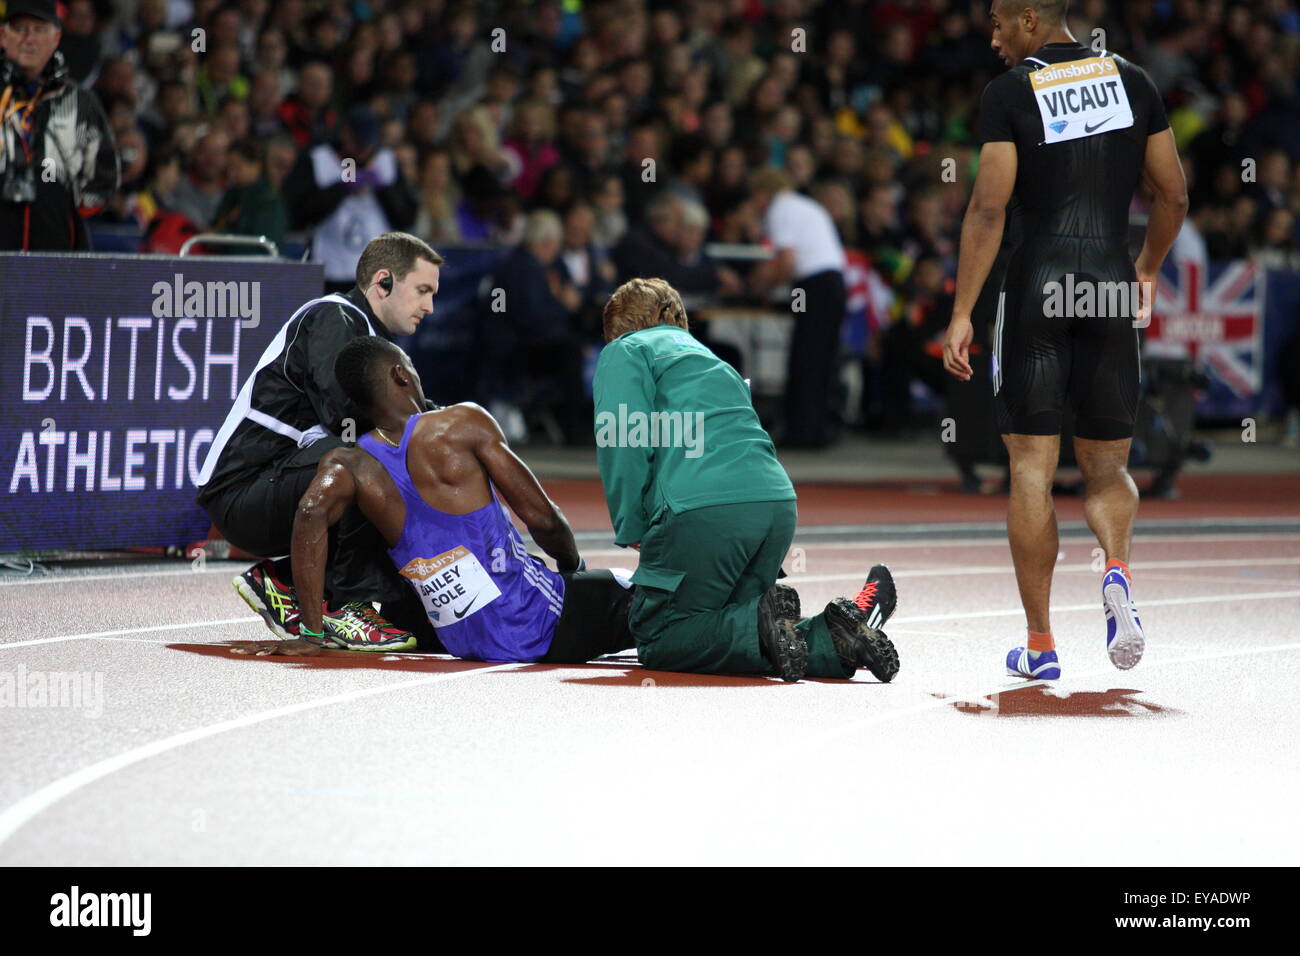 London, UK. 24th July, 2015. Kemar Bailey-Cole (JAM) with medics after he sustained an injury in the mens 100m final during the Sainsbury’s Anniversary Games Diamond League event at The Queen Elizabeth Olympic Park on July 24, 2015 in London, UK Credit:  Grant Burton/Alamy Live News Stock Photo